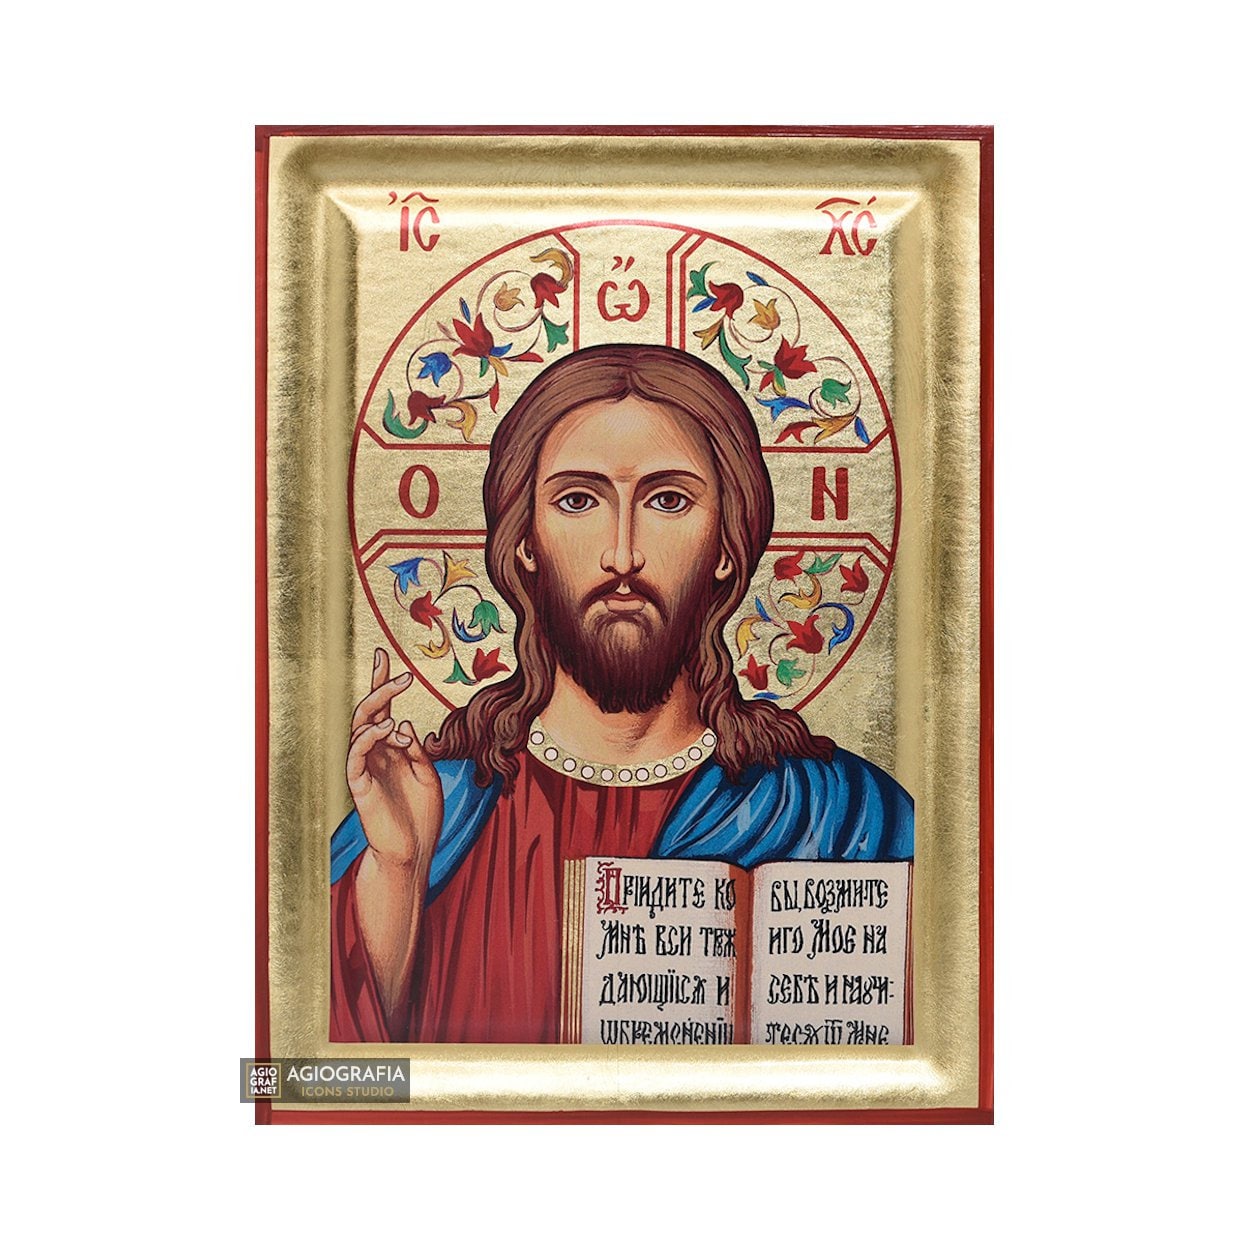 Saint Igor - Wooden icon in canvas with gold background on carved wood –  Christianity Art